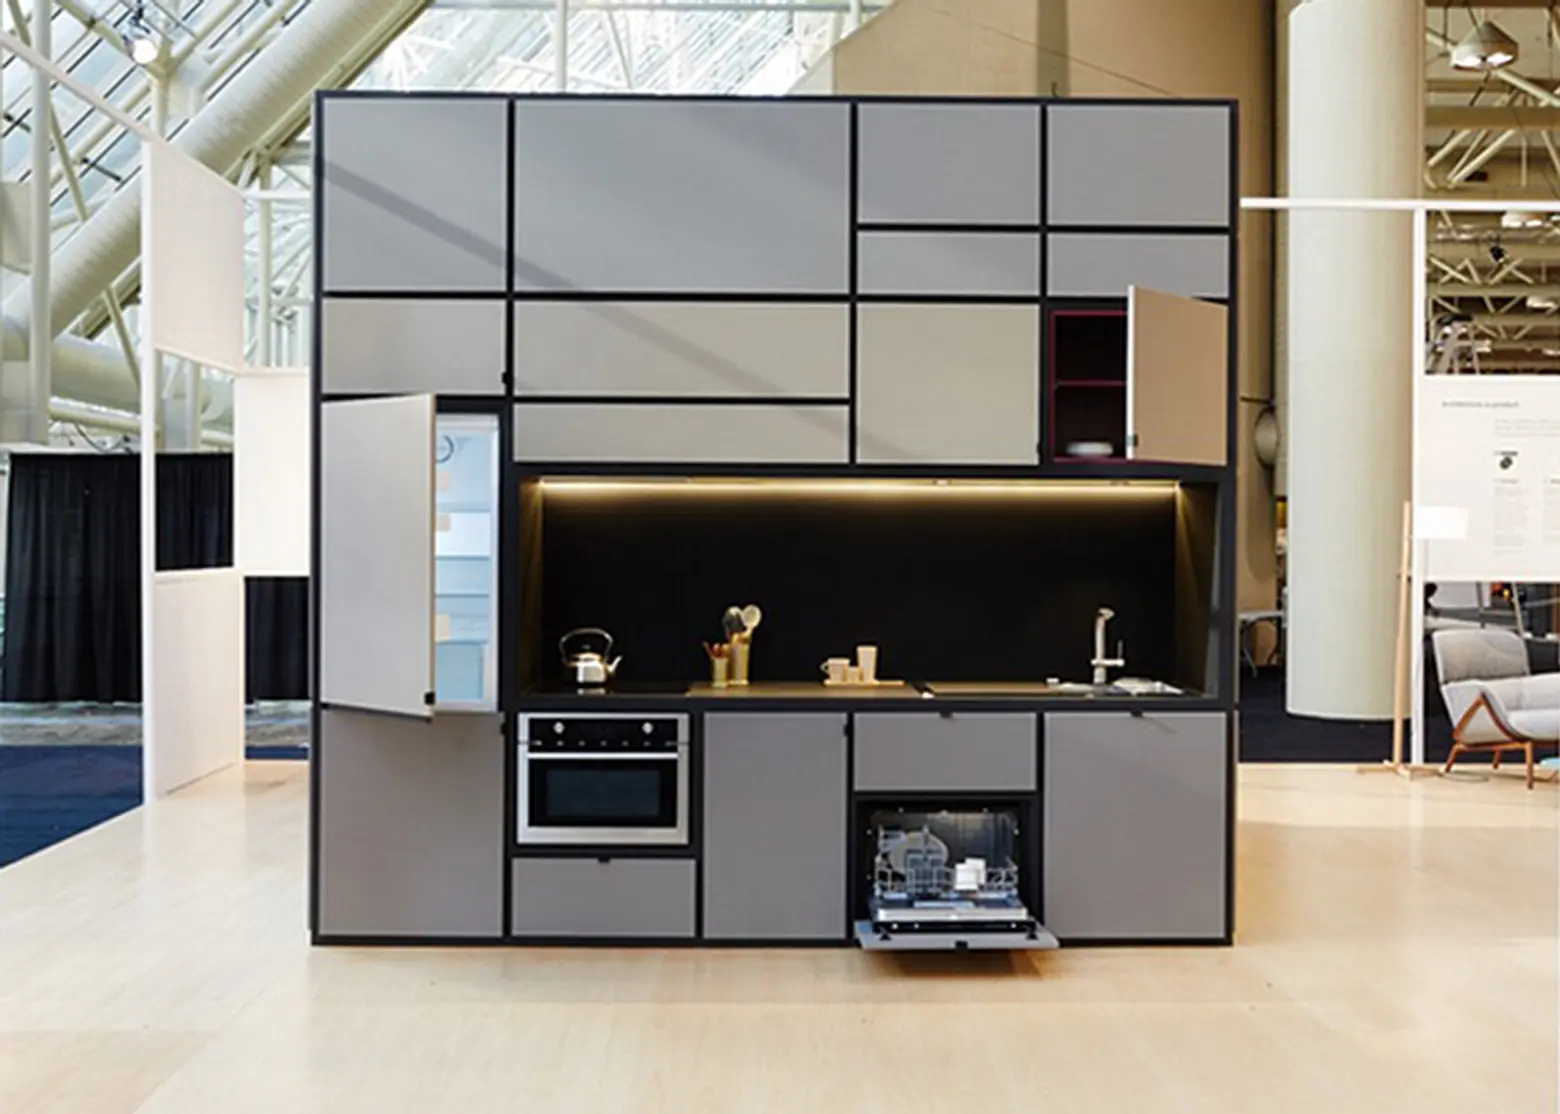 Cubitat: Sleek Plug-and-Play Unit Shelters a Kitchen, Bathroom, Bedroom and  Living Room in One Cube